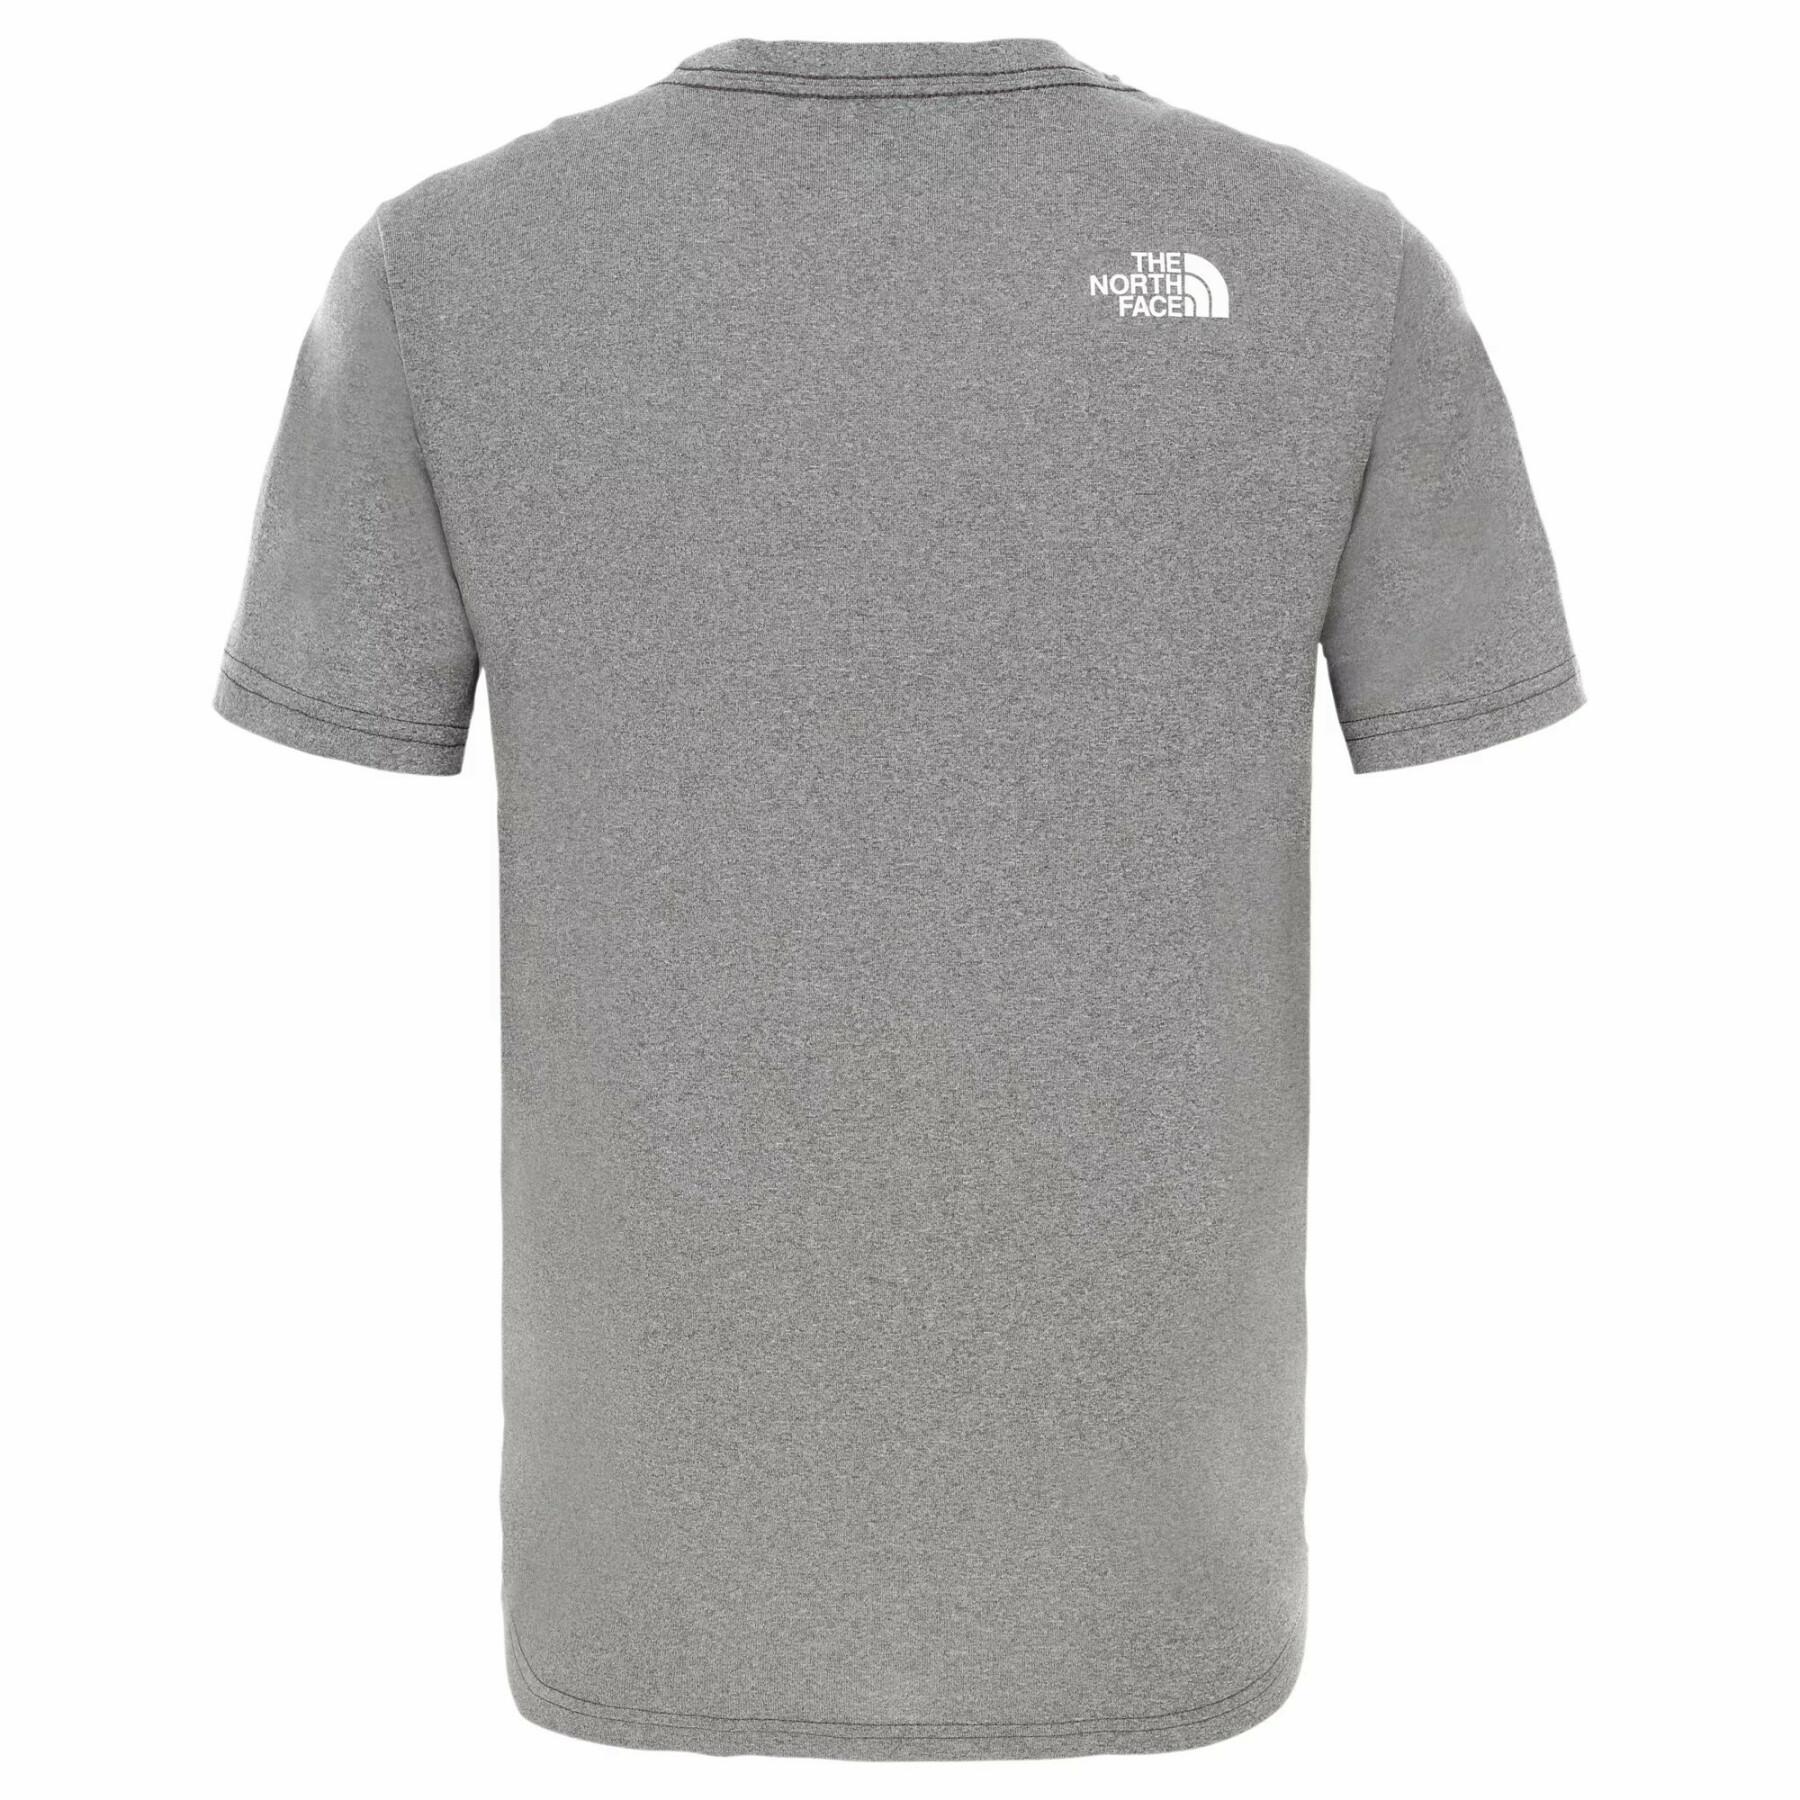 Kinder-T-Shirt The North Face Reaxion 2.0